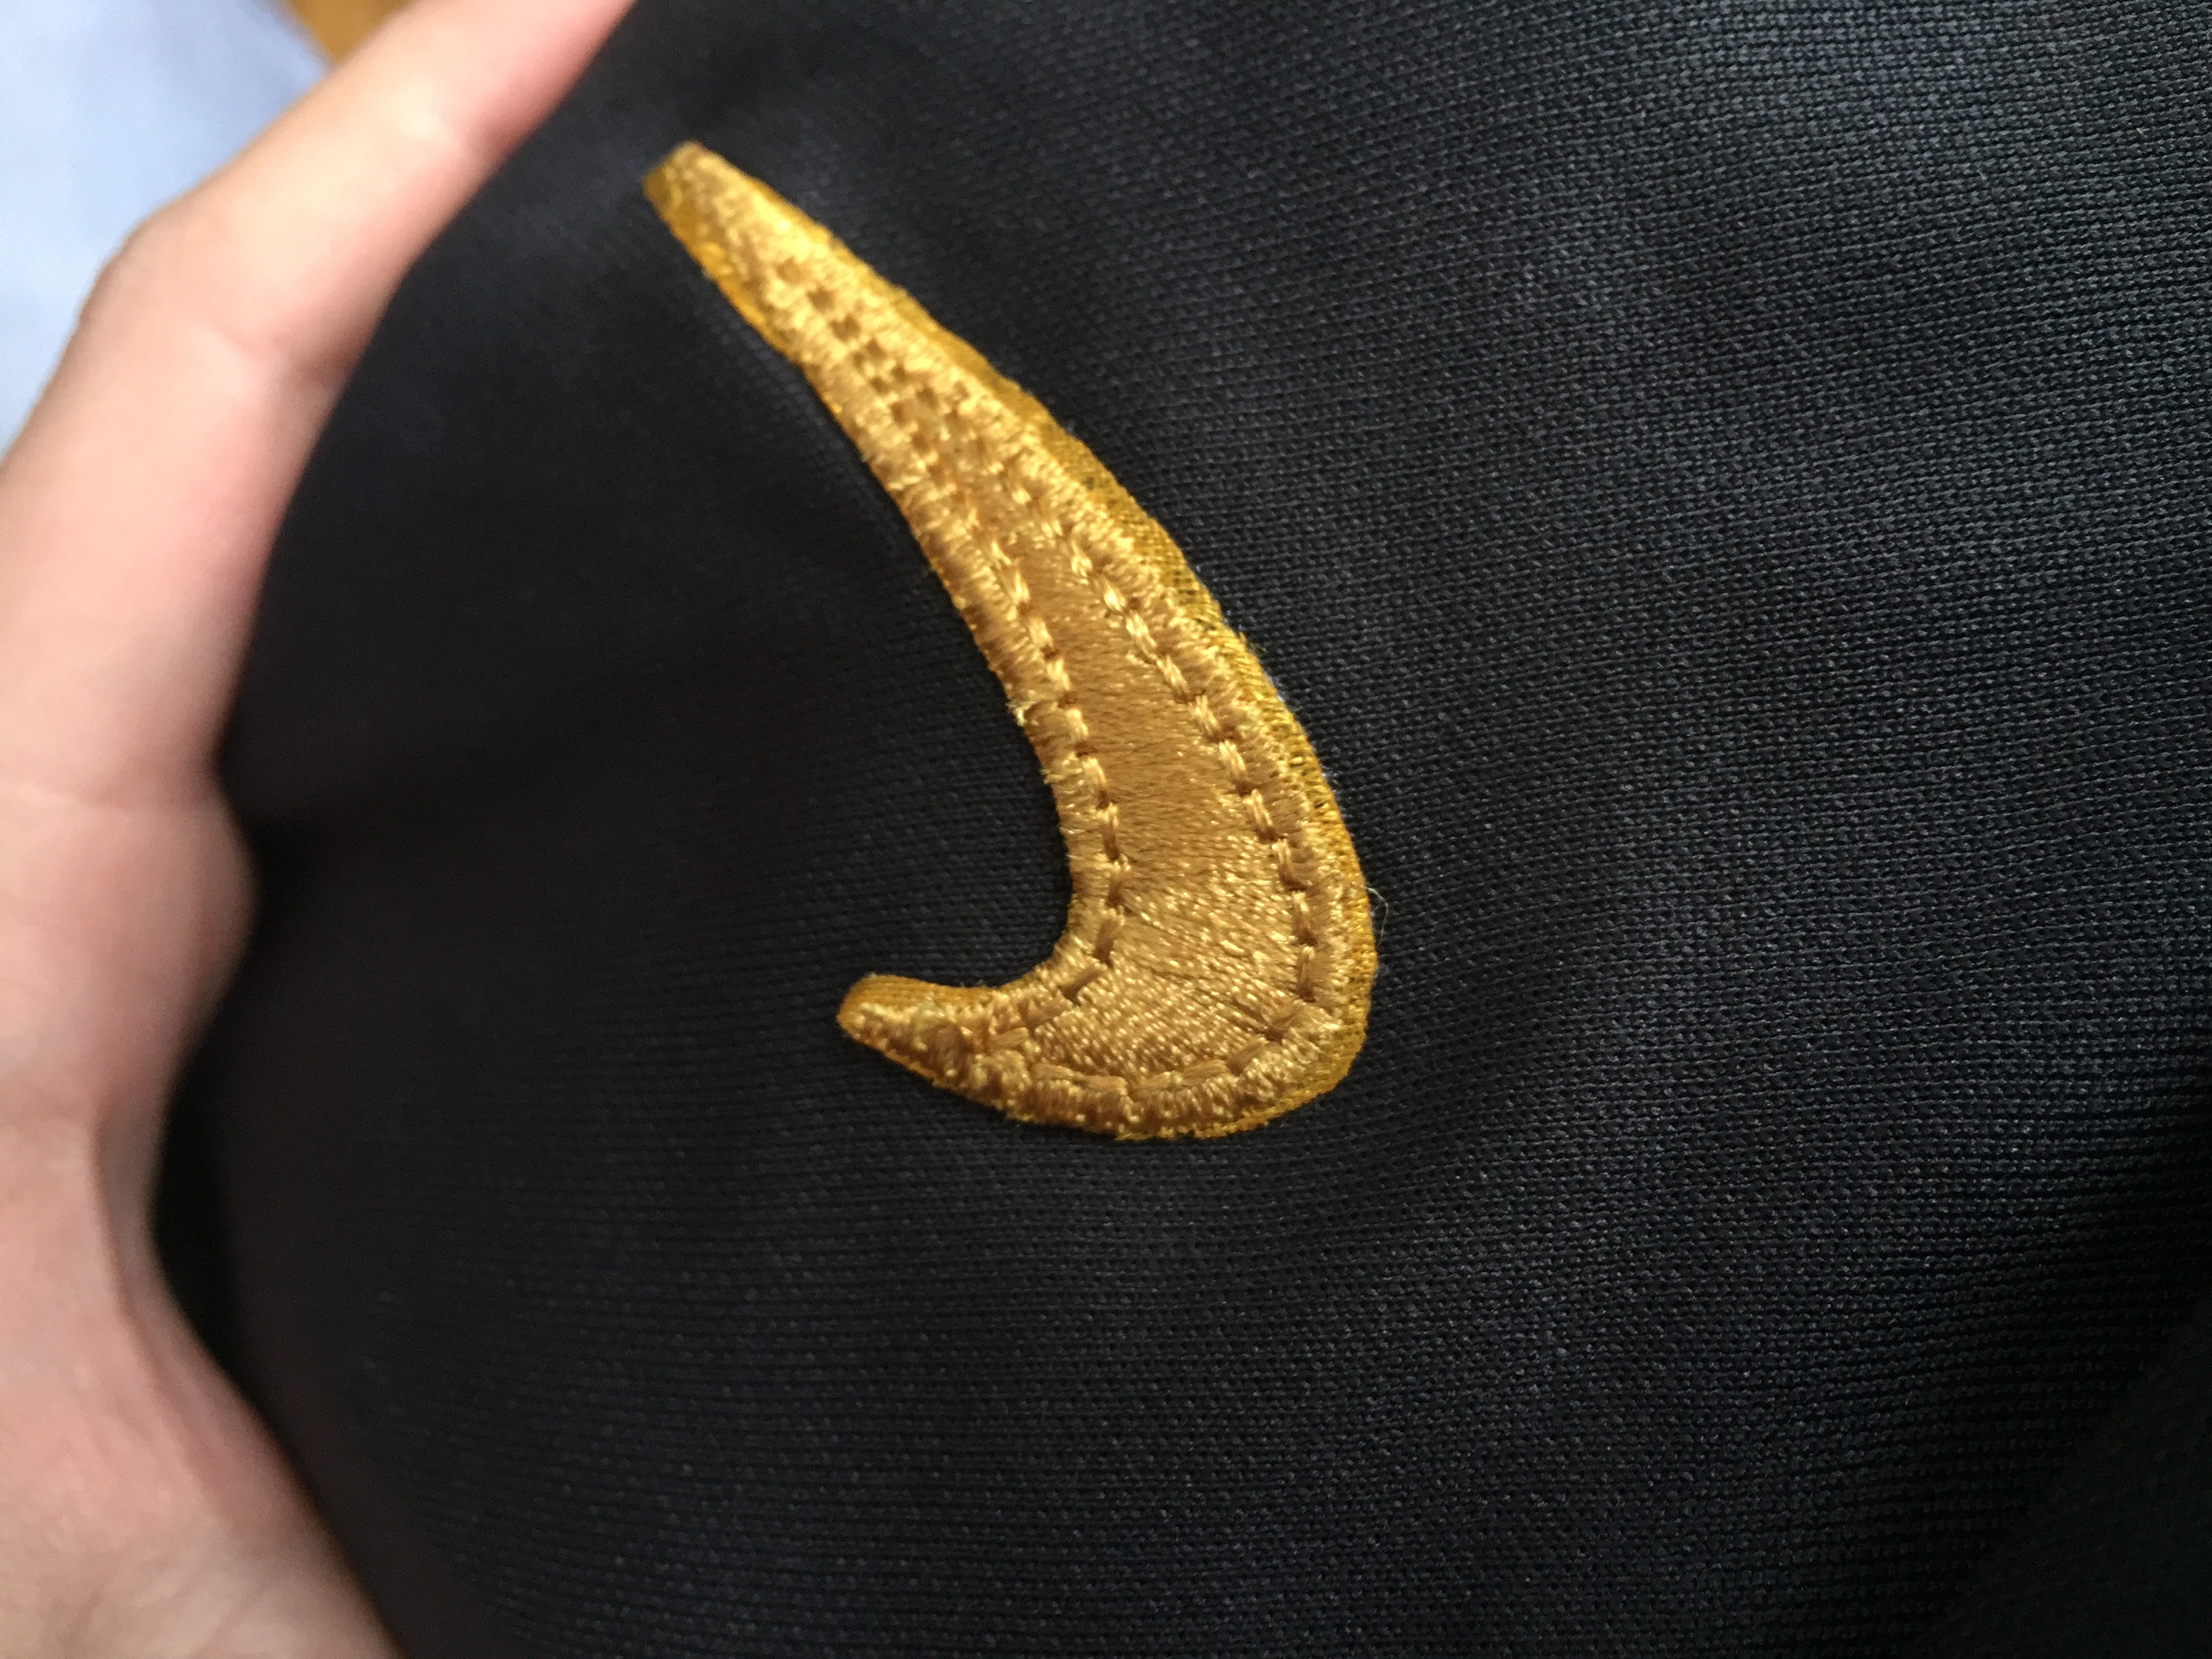 Rip-off Nike swoosh patch